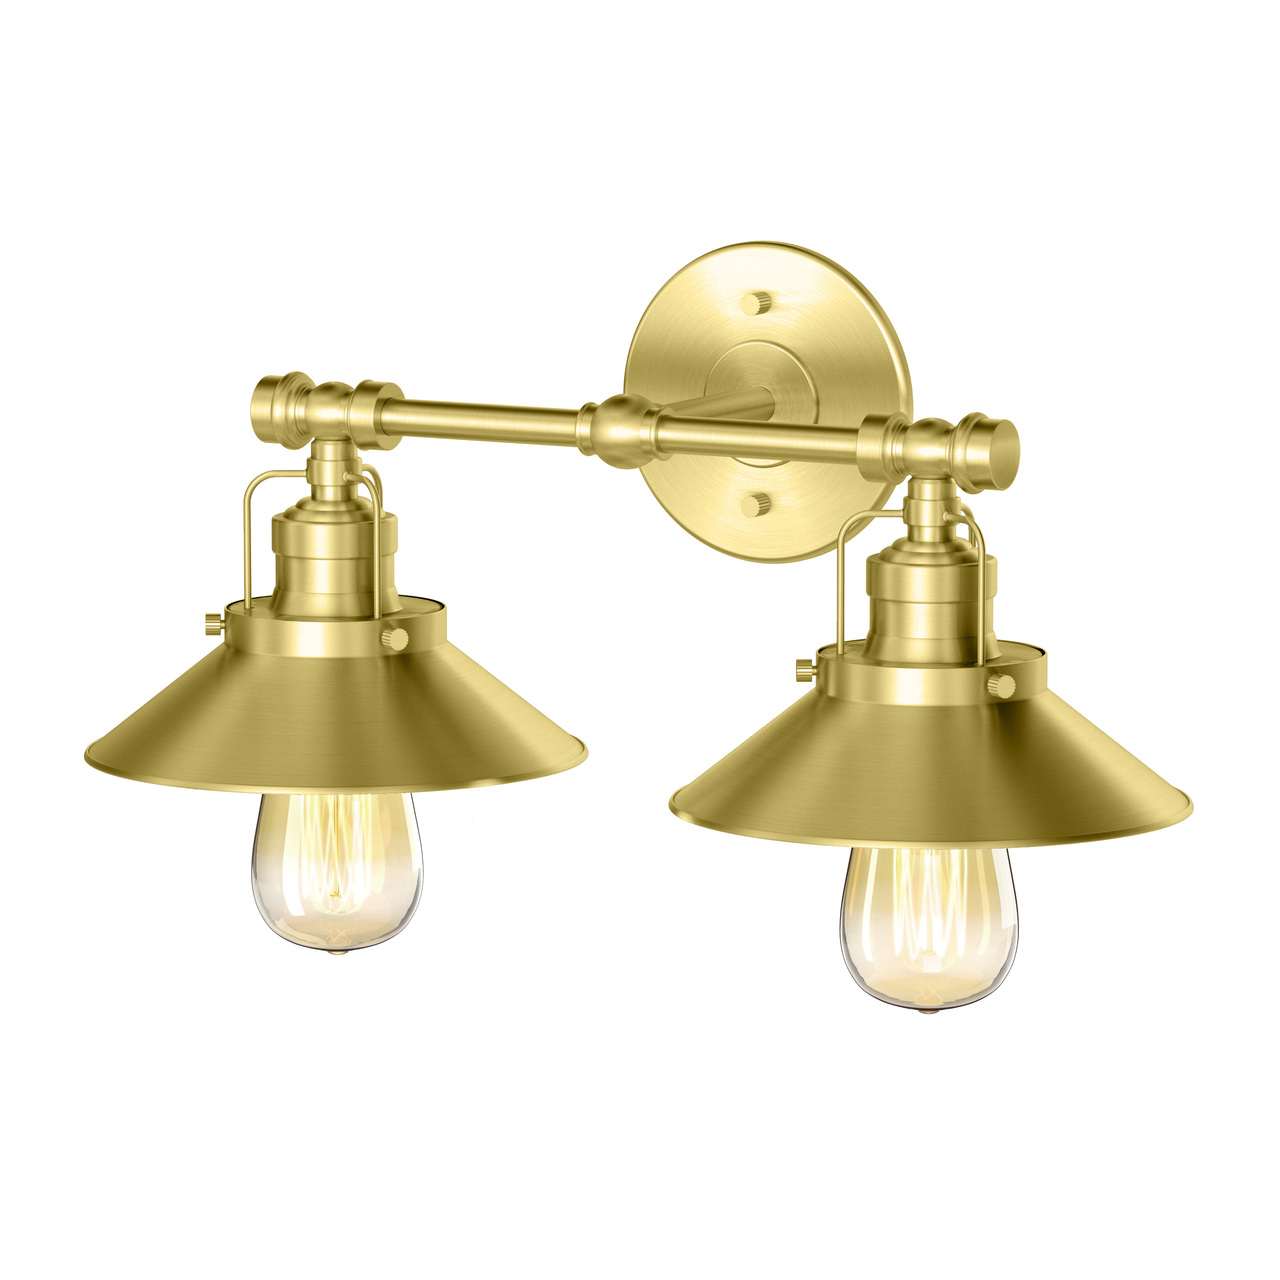 Modern Farmhouse Retro Double Light Sconce in Brushed Brass